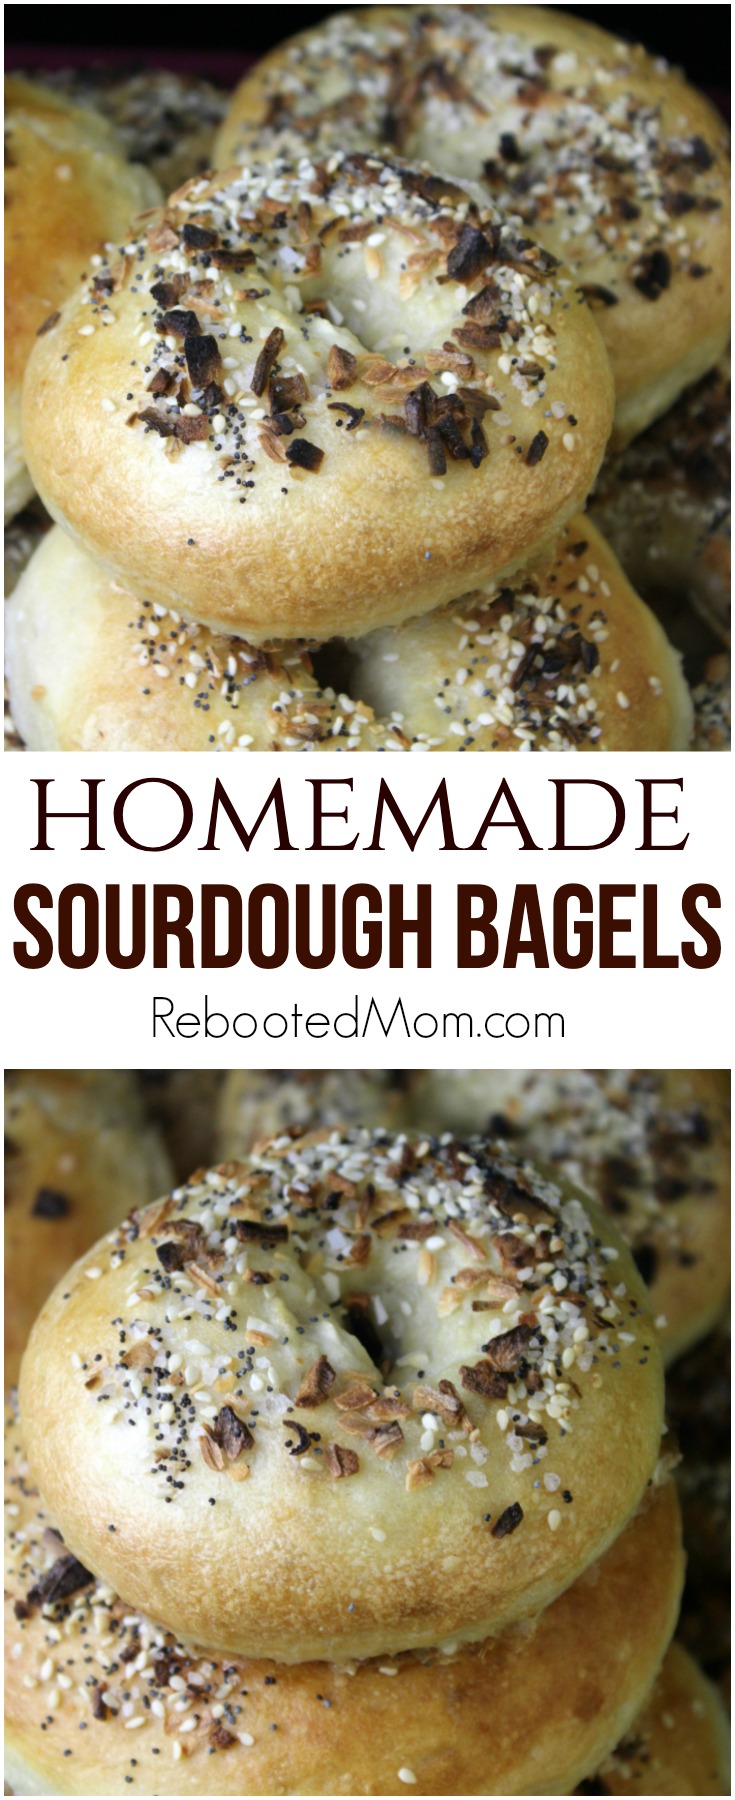 Easy homemade sourdough bagels you can make at home with your own active sourdough starter. This step by step tutorial makes the most delicious bagels! #sourdough #bagels #homemade #breadmaking #starter 